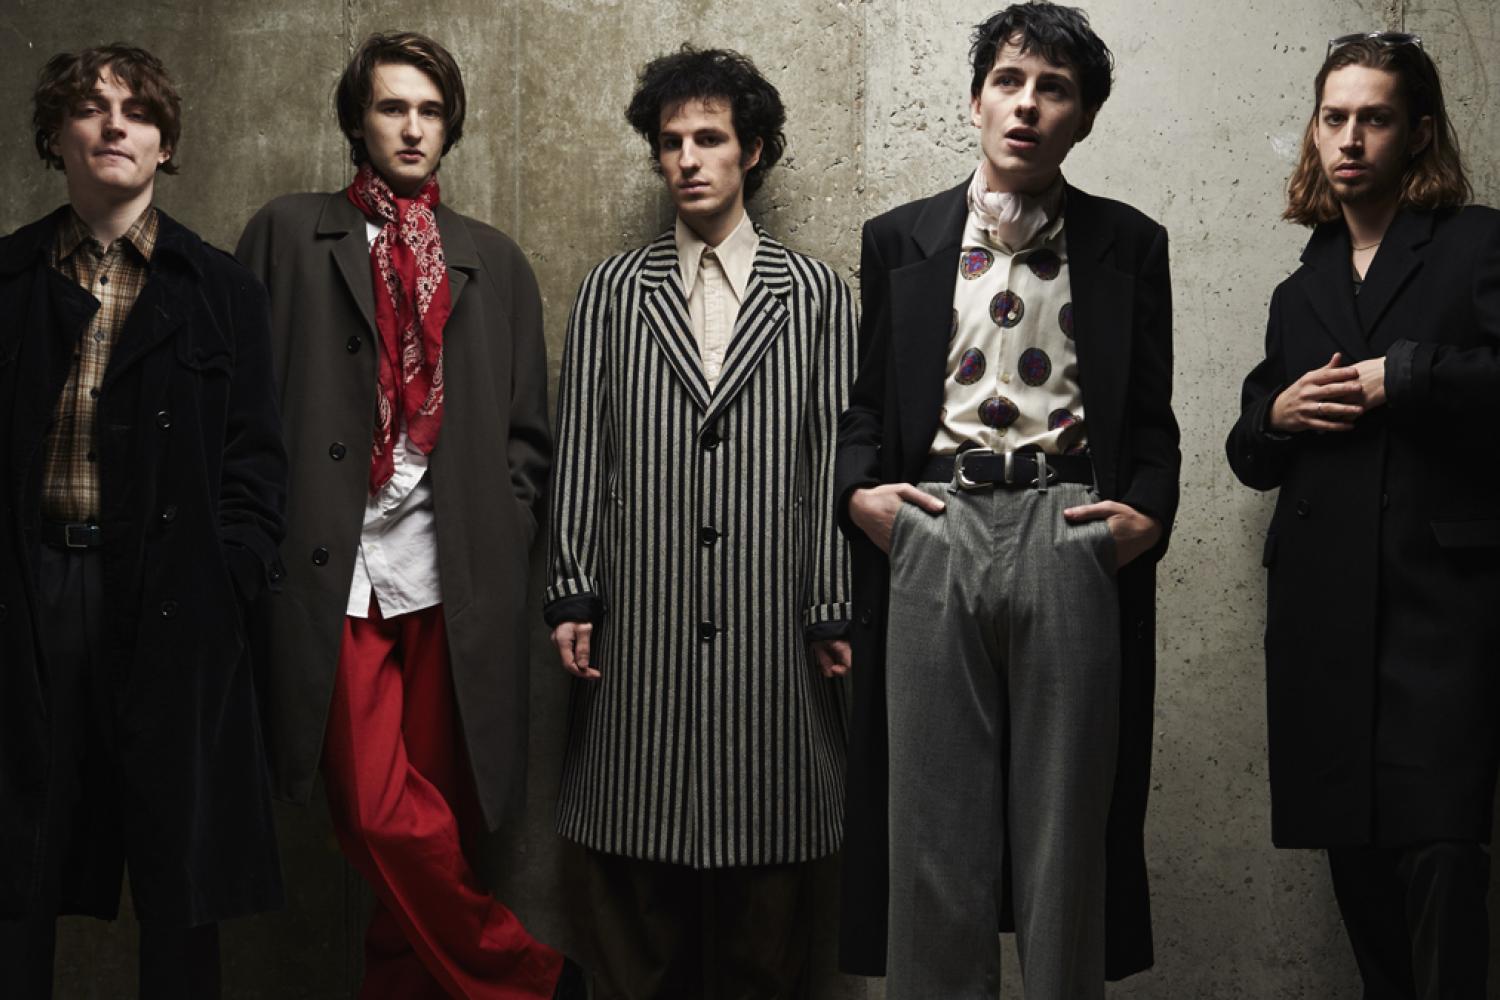 Live Review: Swim Deep // The Dome, Tufnell Park 24.02.16